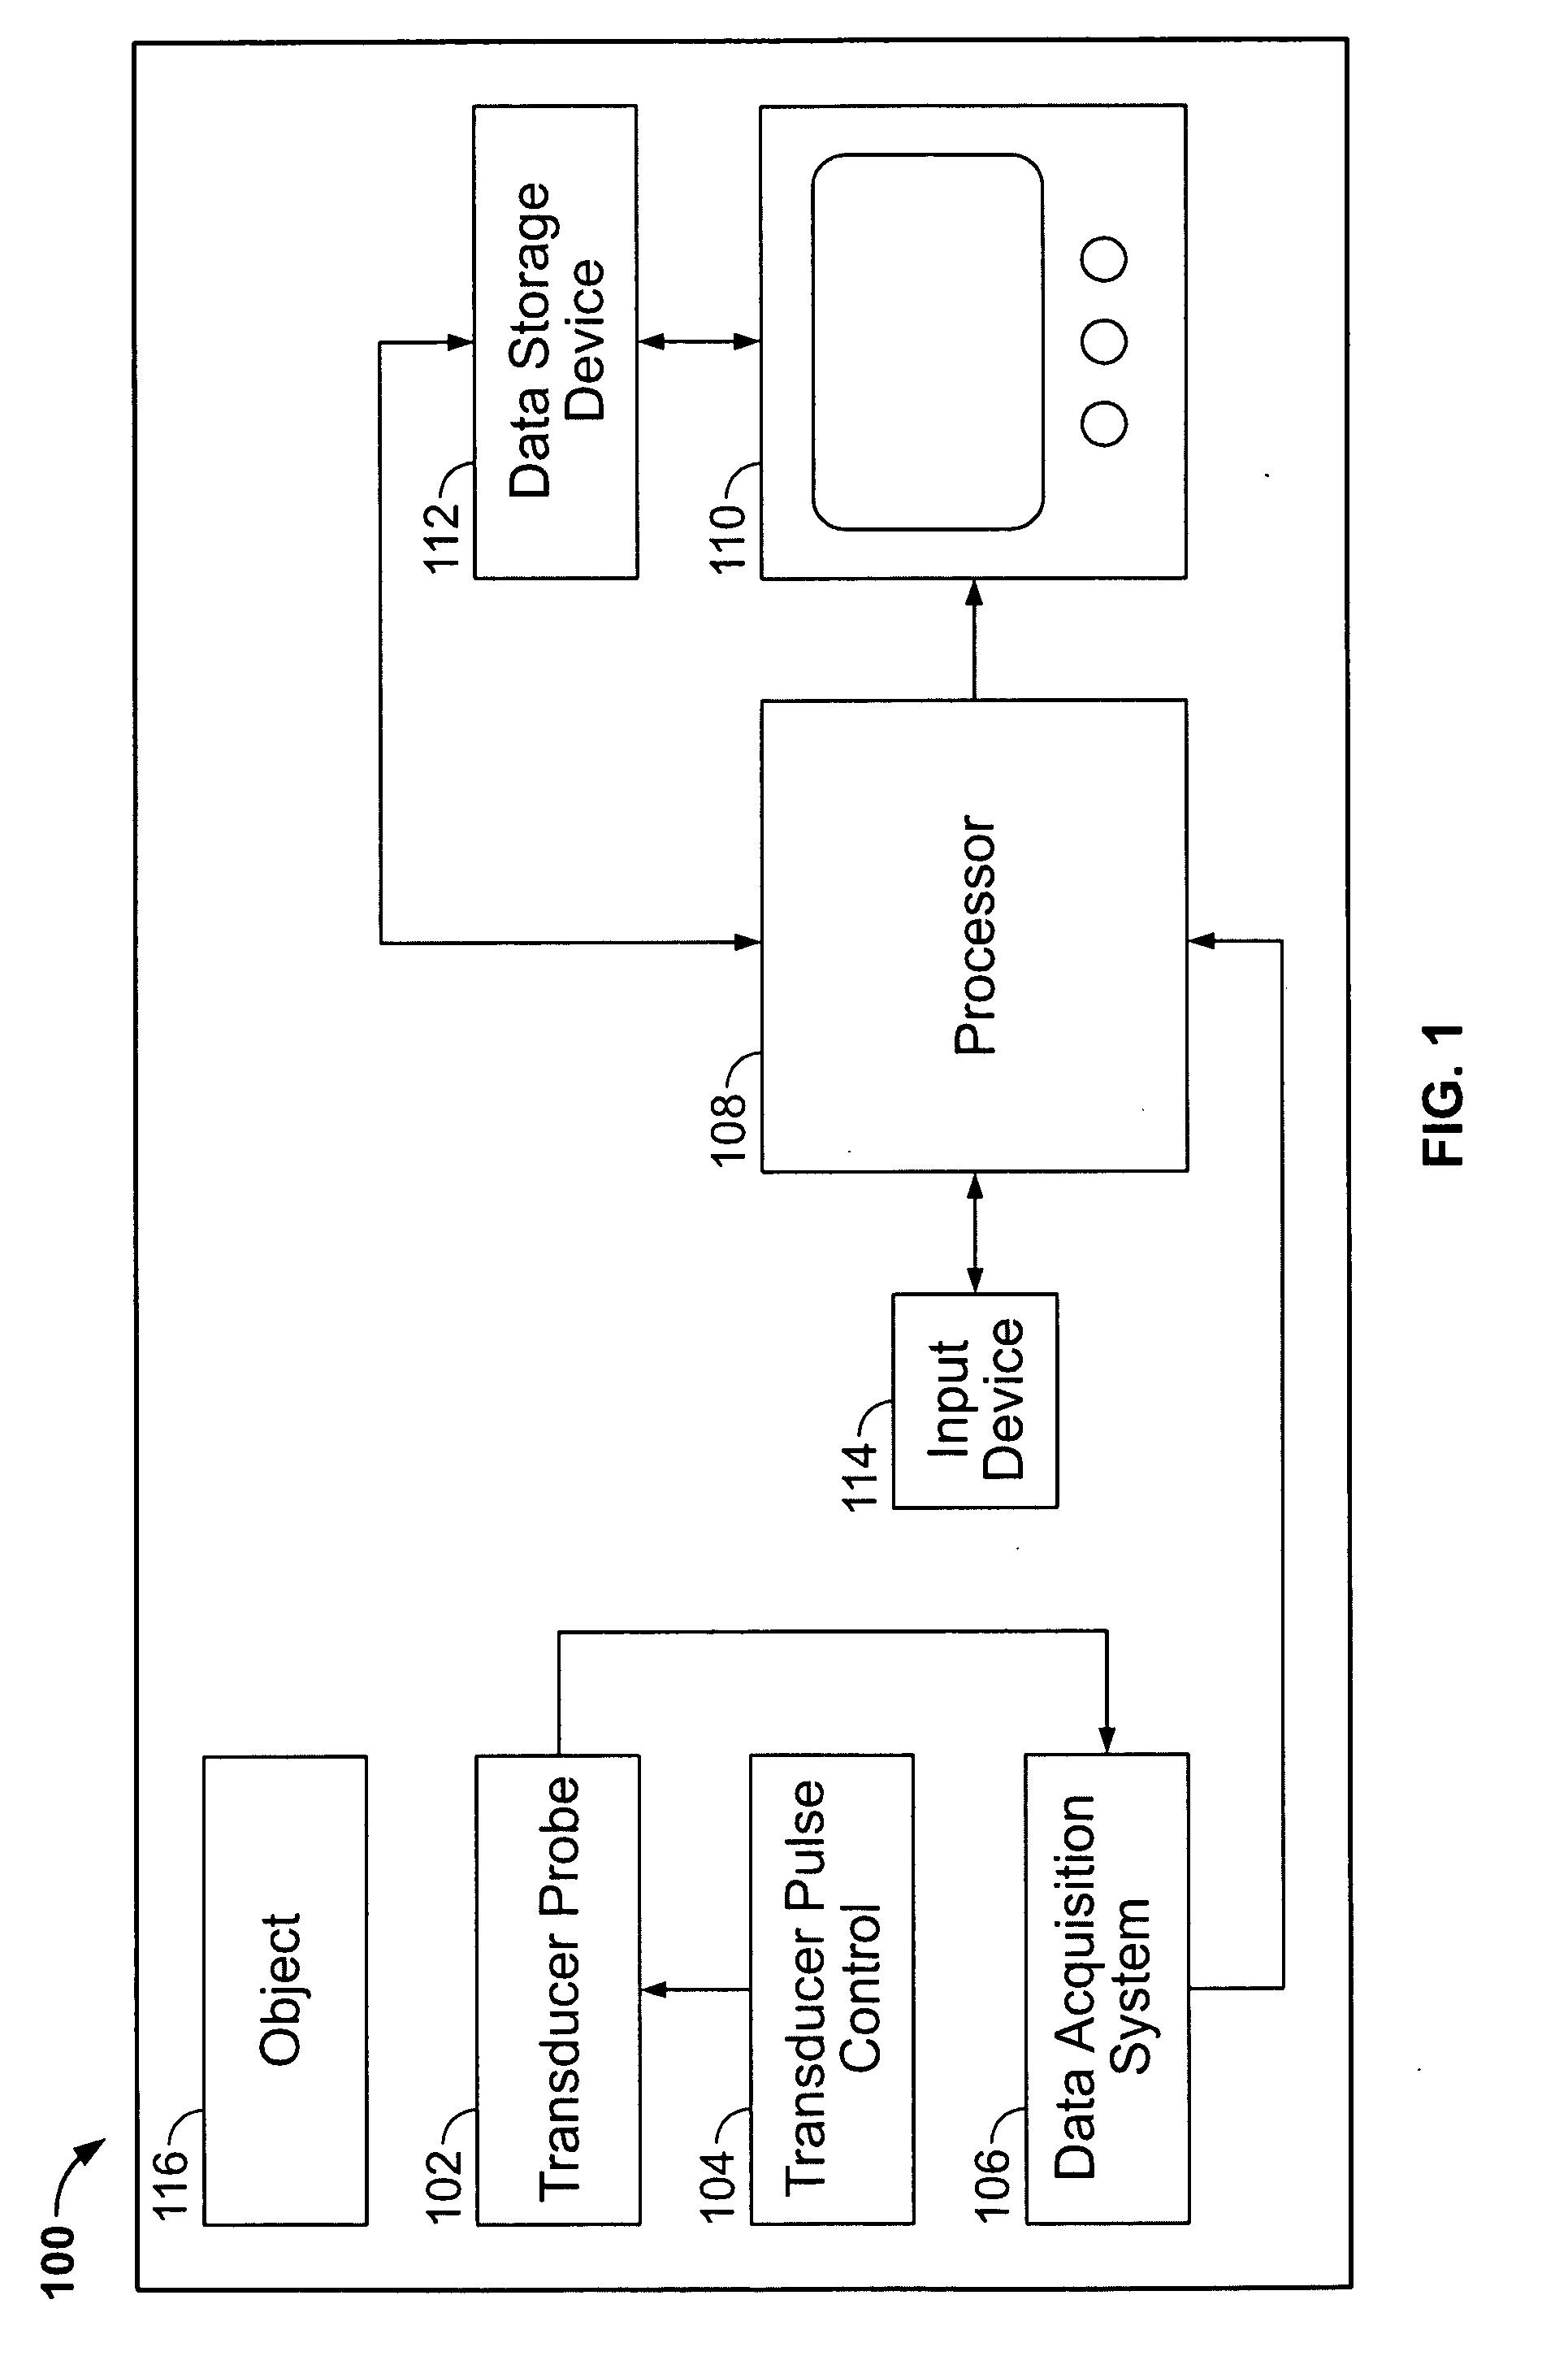 Method and system for determining contact along a surface of an ultrasound probe